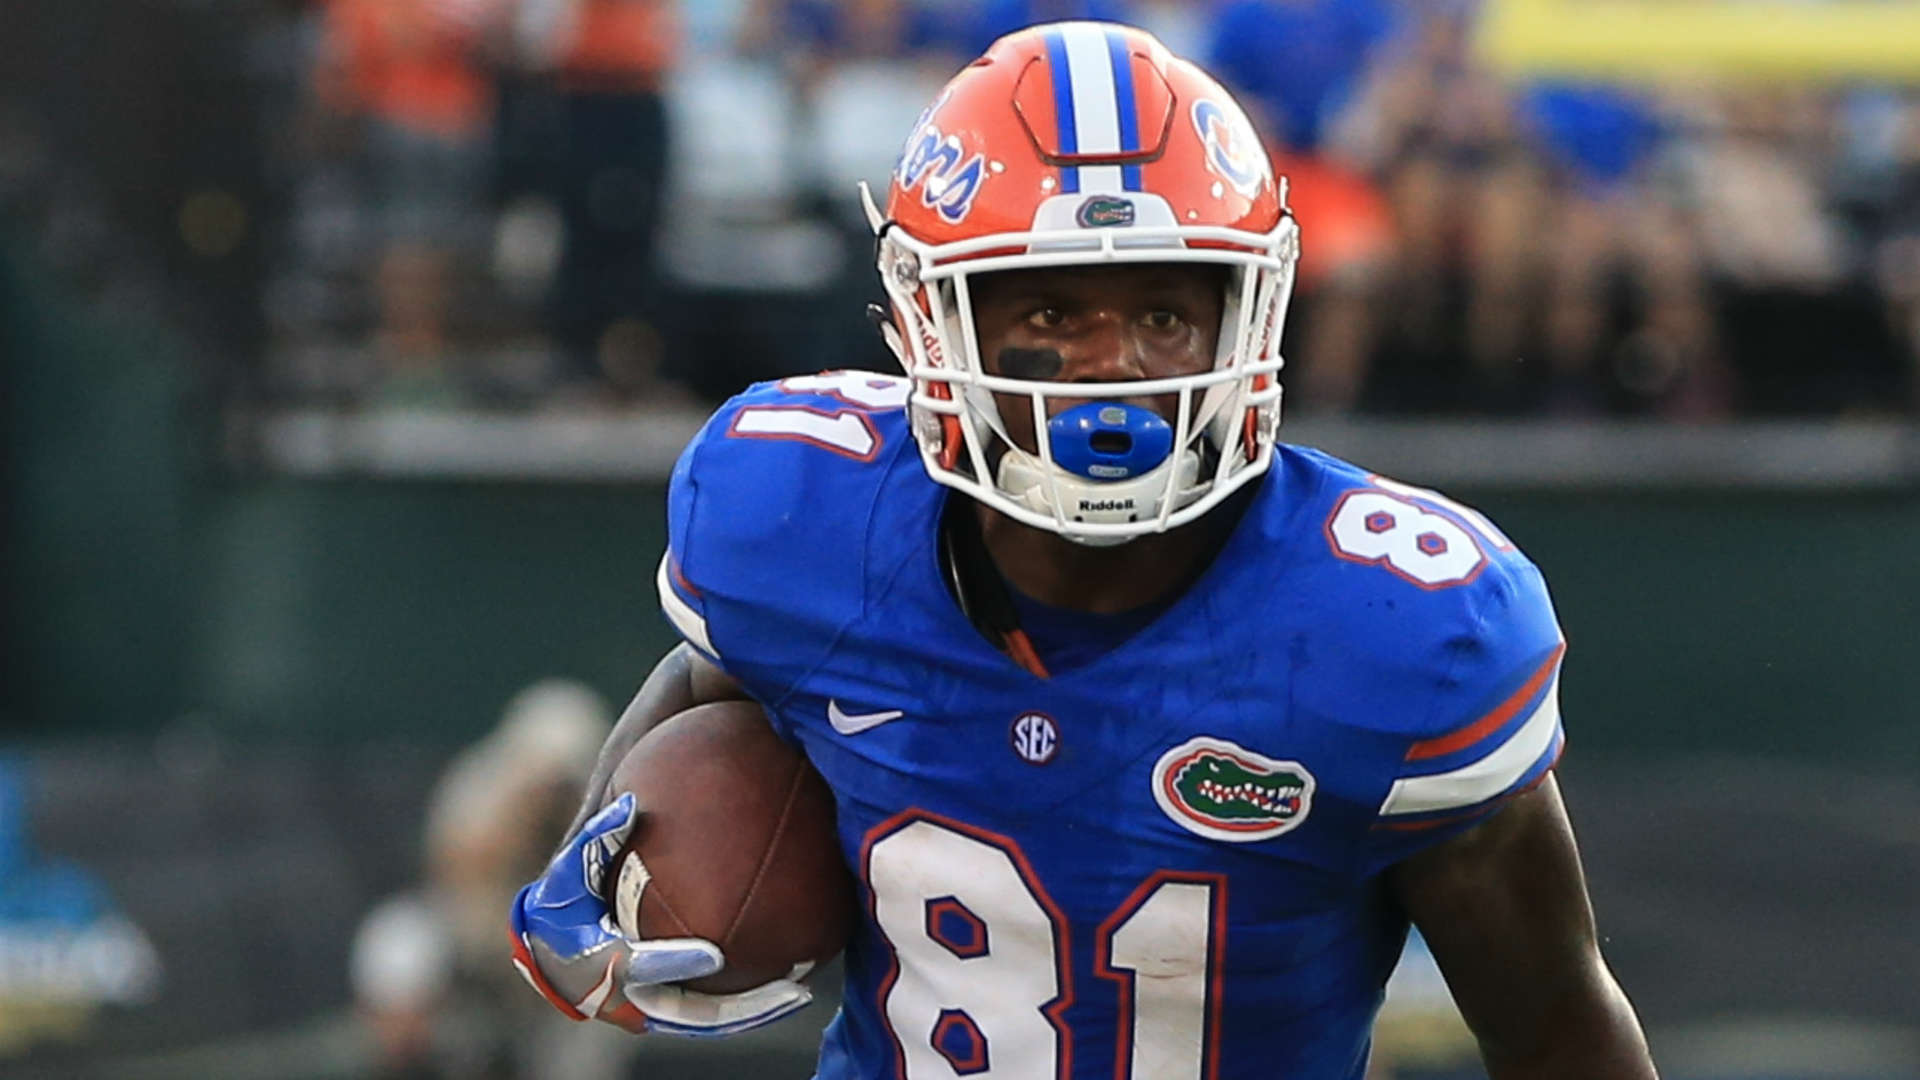 NFL Scouting Combine 2018: Former Gators WR Antonio Callaway promises troubles are in the past